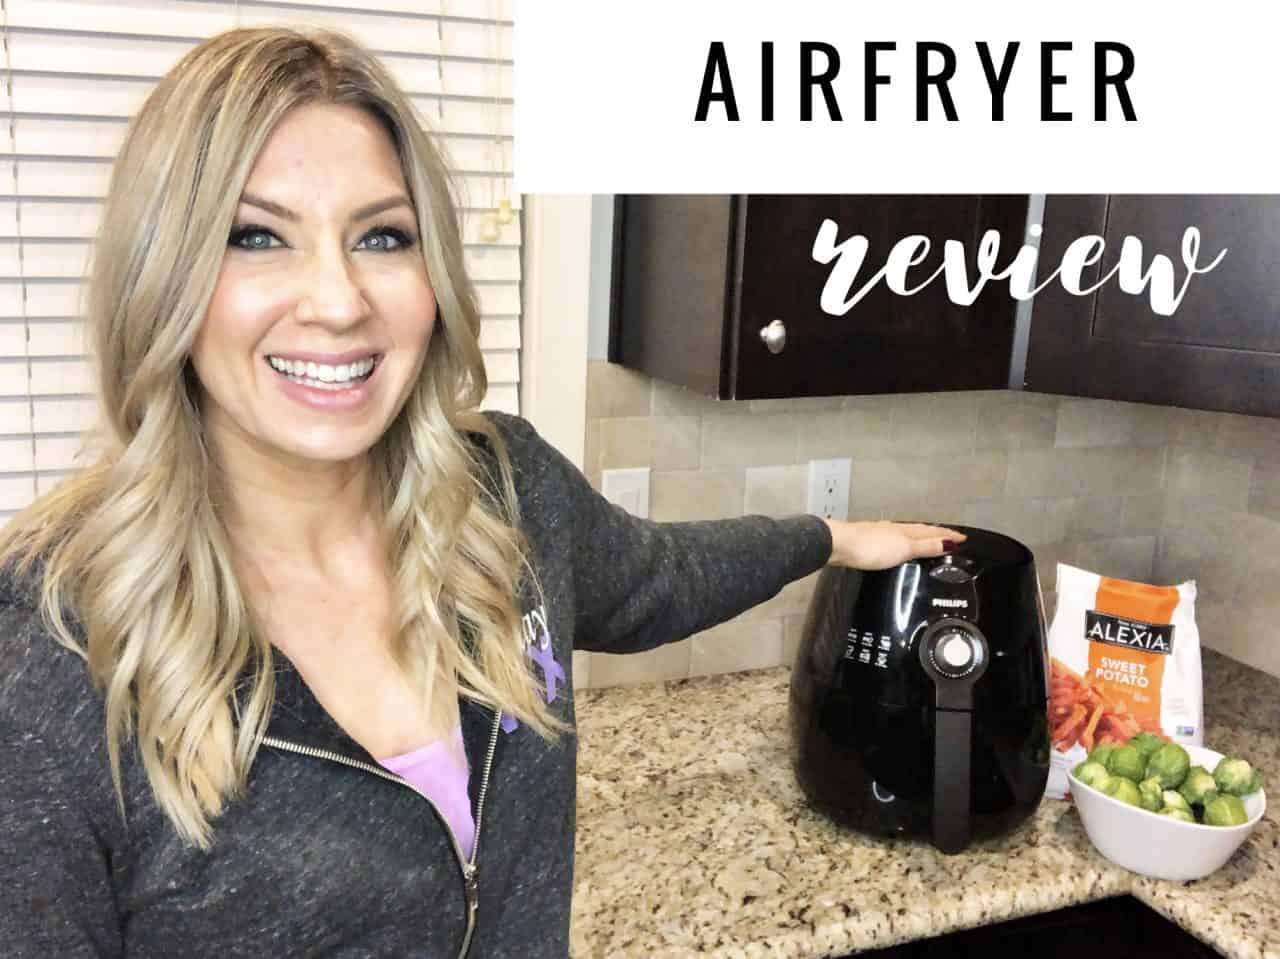 Air Fryer Review 2019 | Is It Worth The Money?, air fryer review 2019, air fryer, air fryer reviews 2019, why use an air fryer, airfryer review 2019